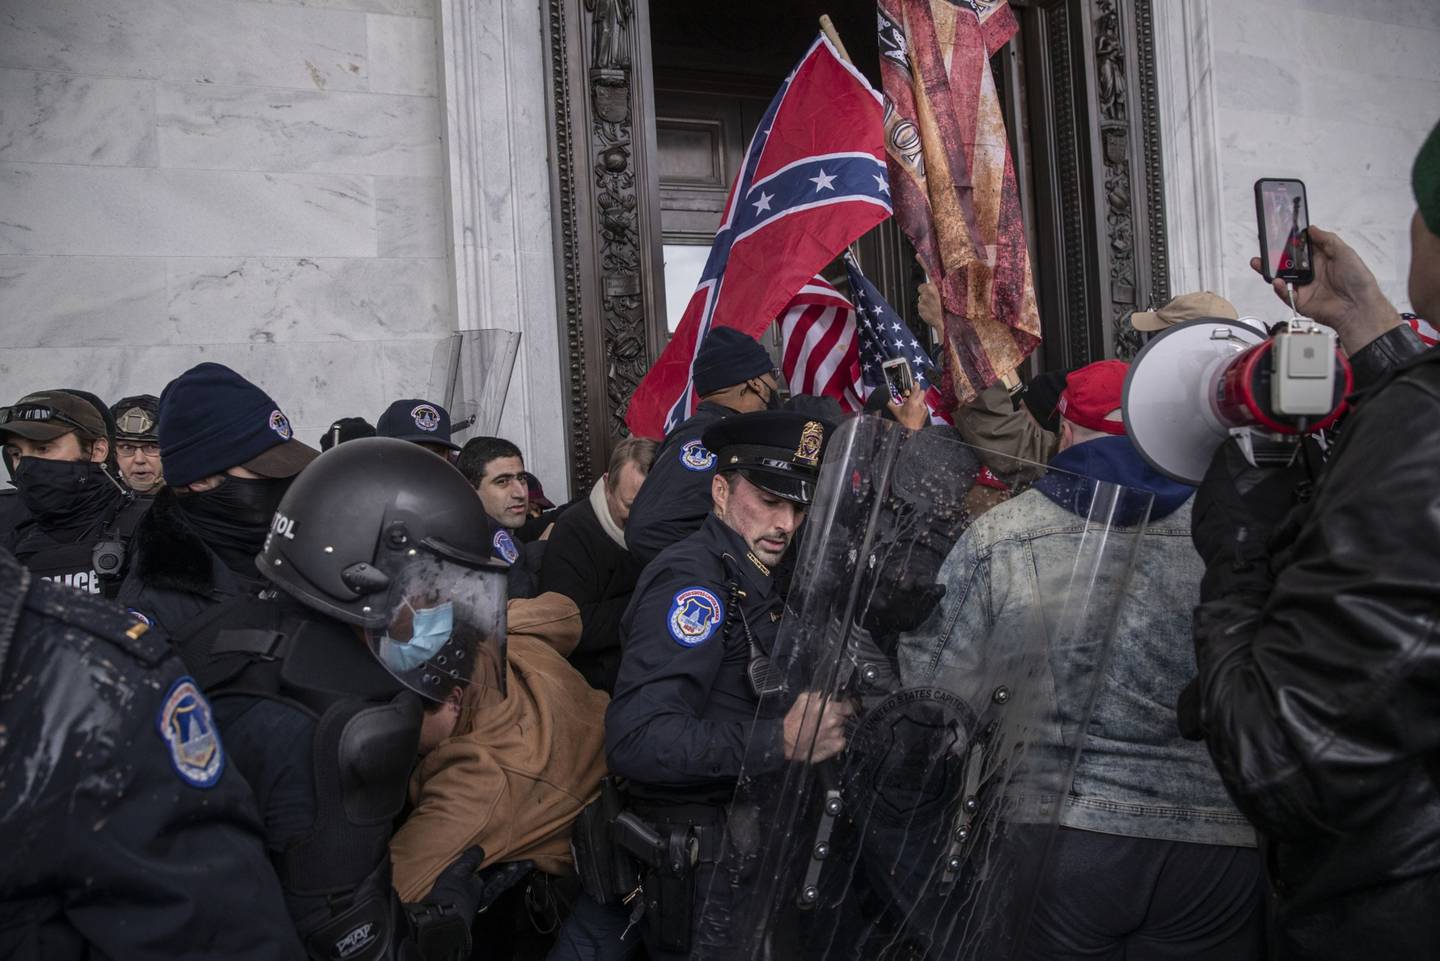 Demonstrators clash with U.S. Capitol police officers while trying to enter the Capitol building during a protest outside of in Washington, D.C., U.S., on Wednesday, Jan. 6, 2021.